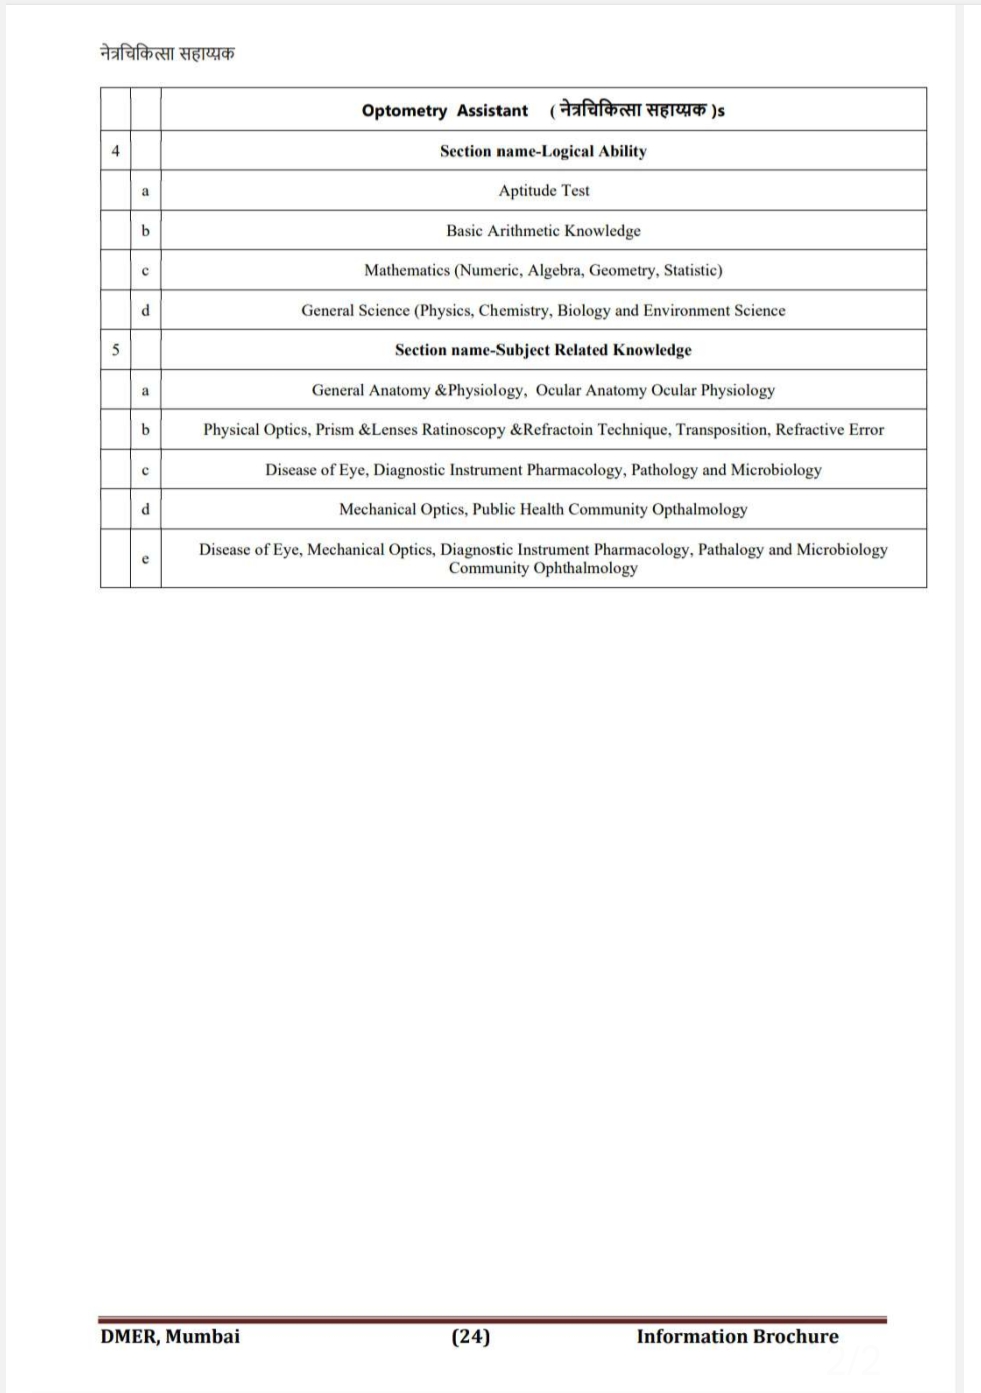 DMER Ophthalmic Assistant Syllabus